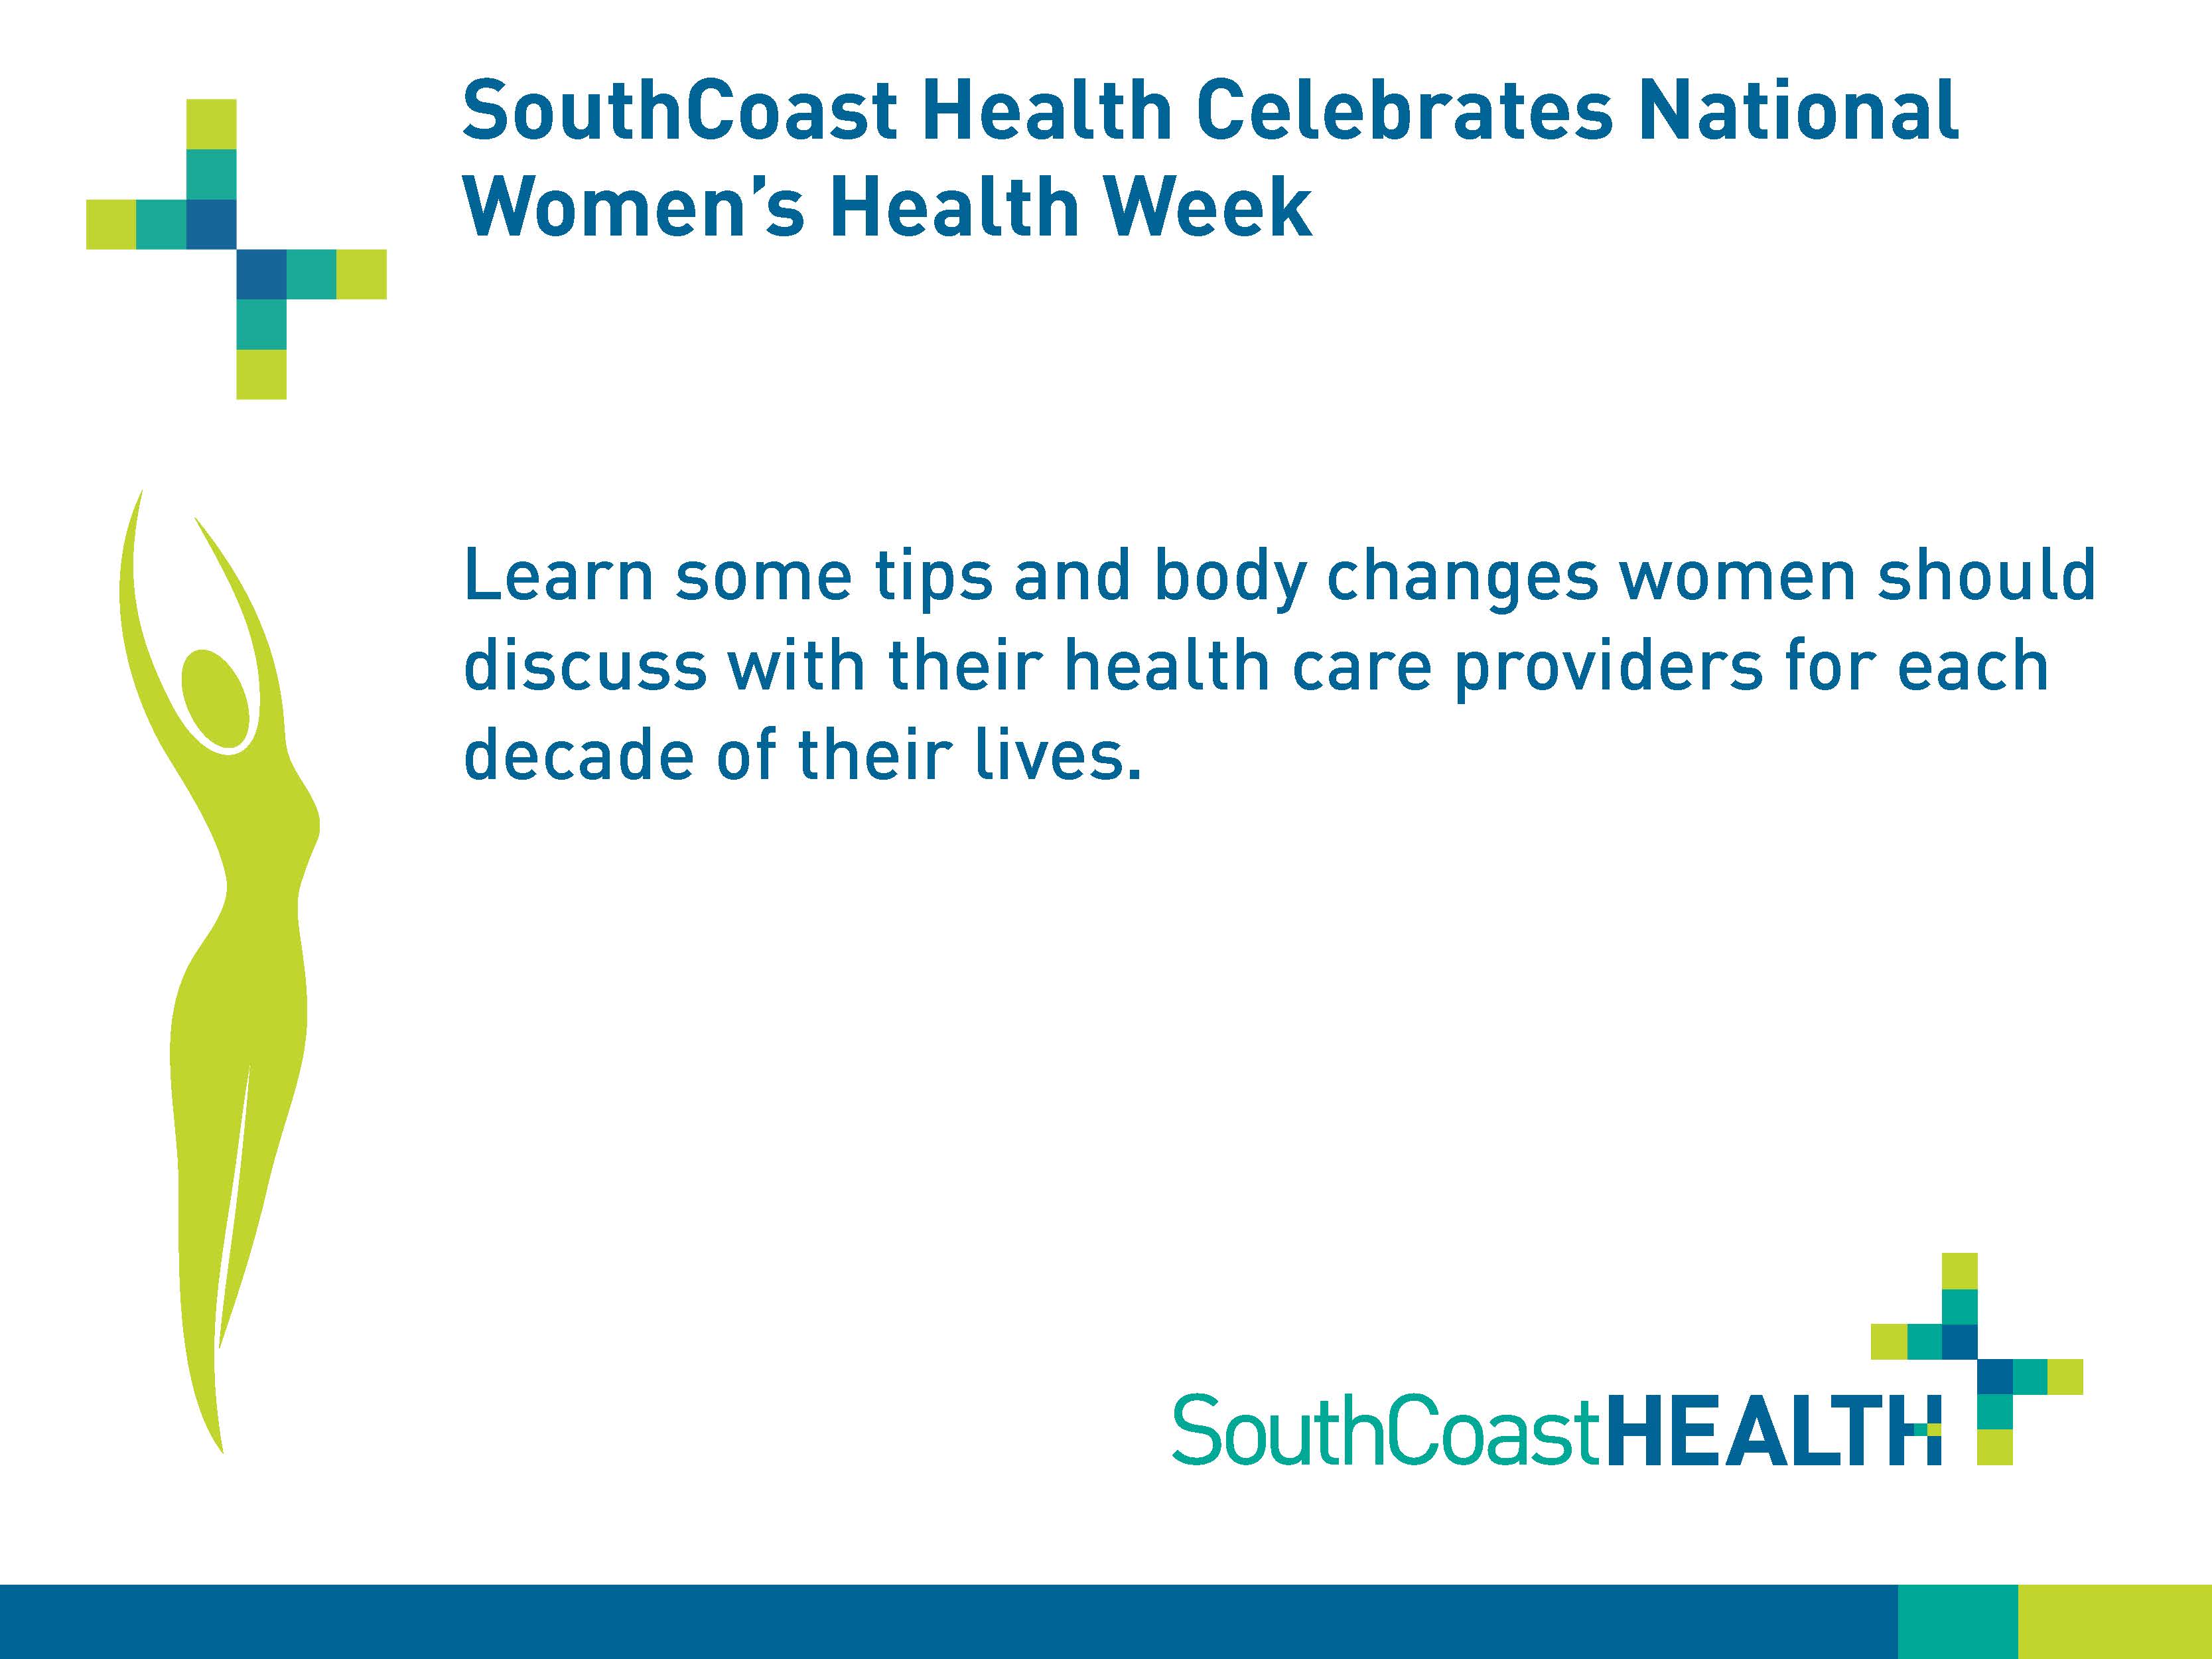 SouthCoast Health Celebrates National Women’s Health Week. Learn some tips and body changes women should discuss with their health care providers for each decade of their lives.